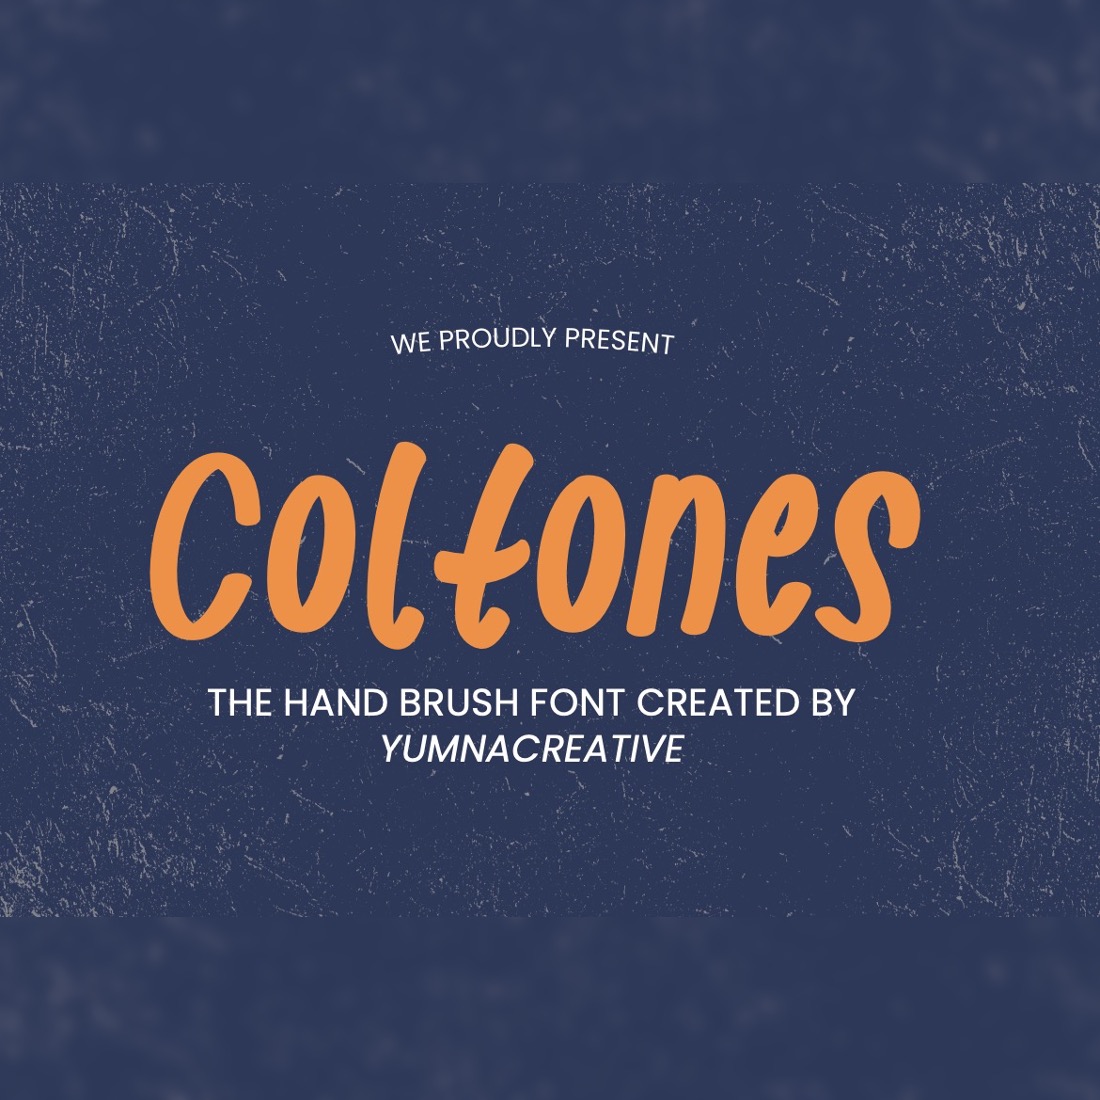 Coltones - Hand Brush Font preview image.